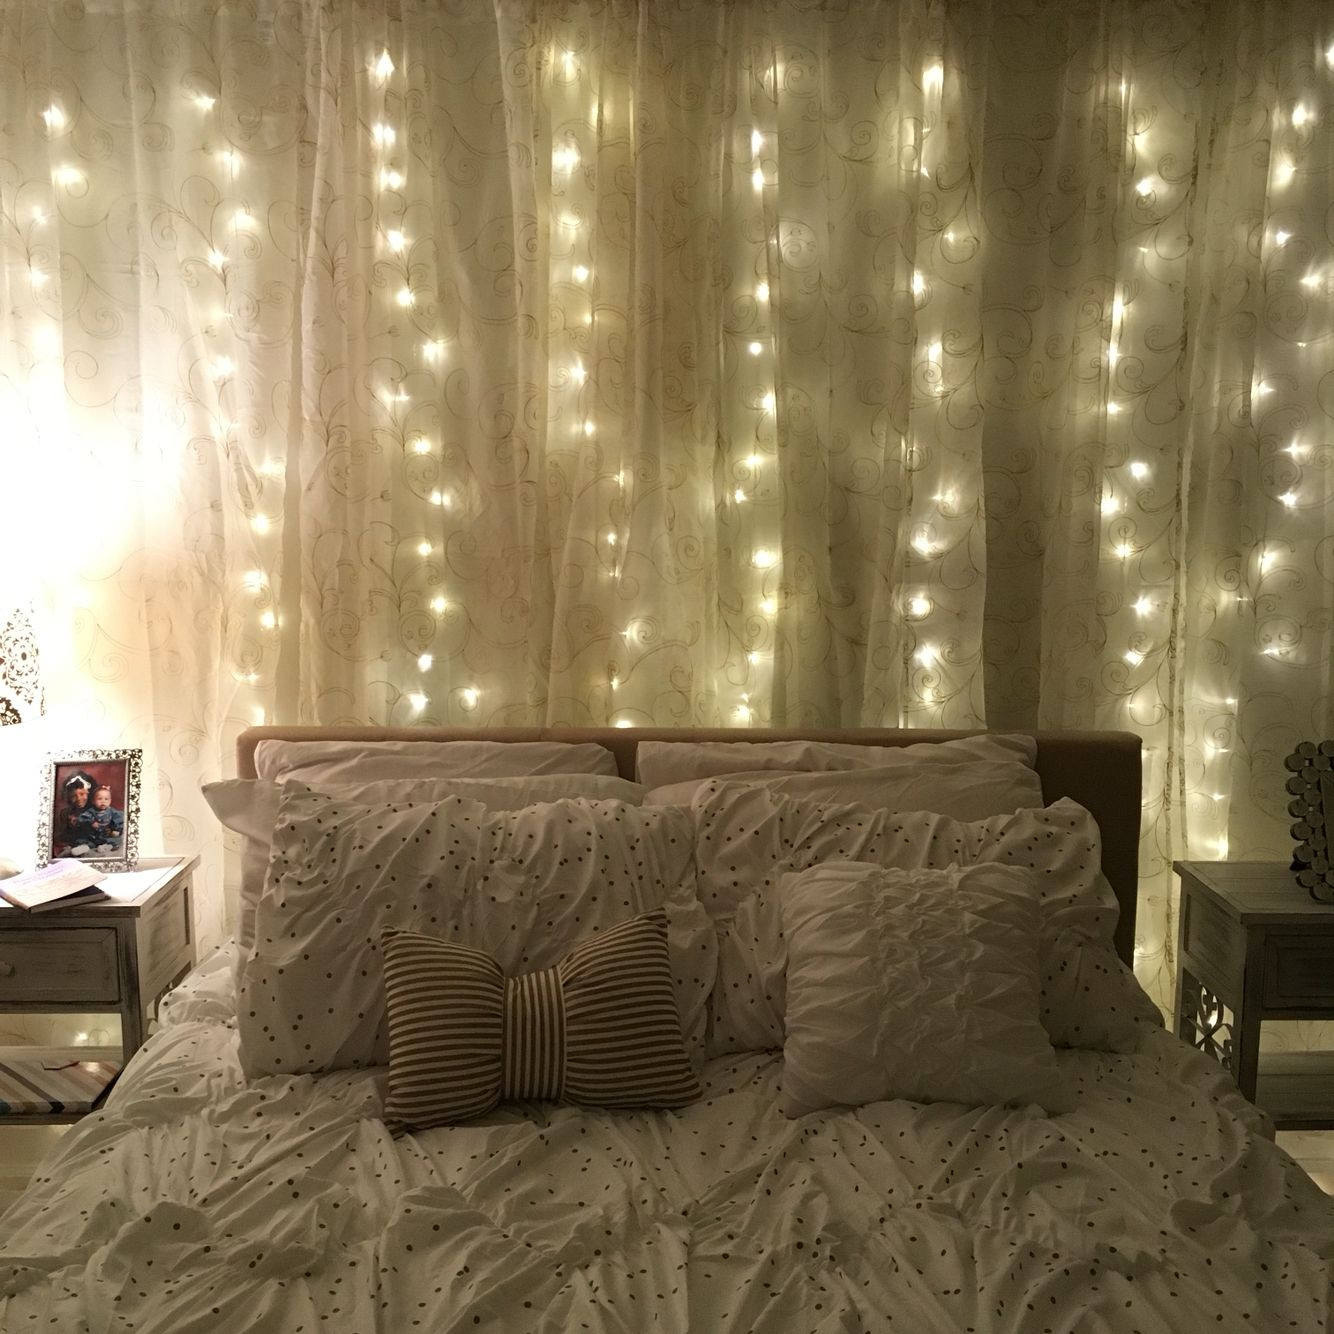 Curtain Lights Bedroom
 DIY curtain lights Lights are from Amazon and curtains